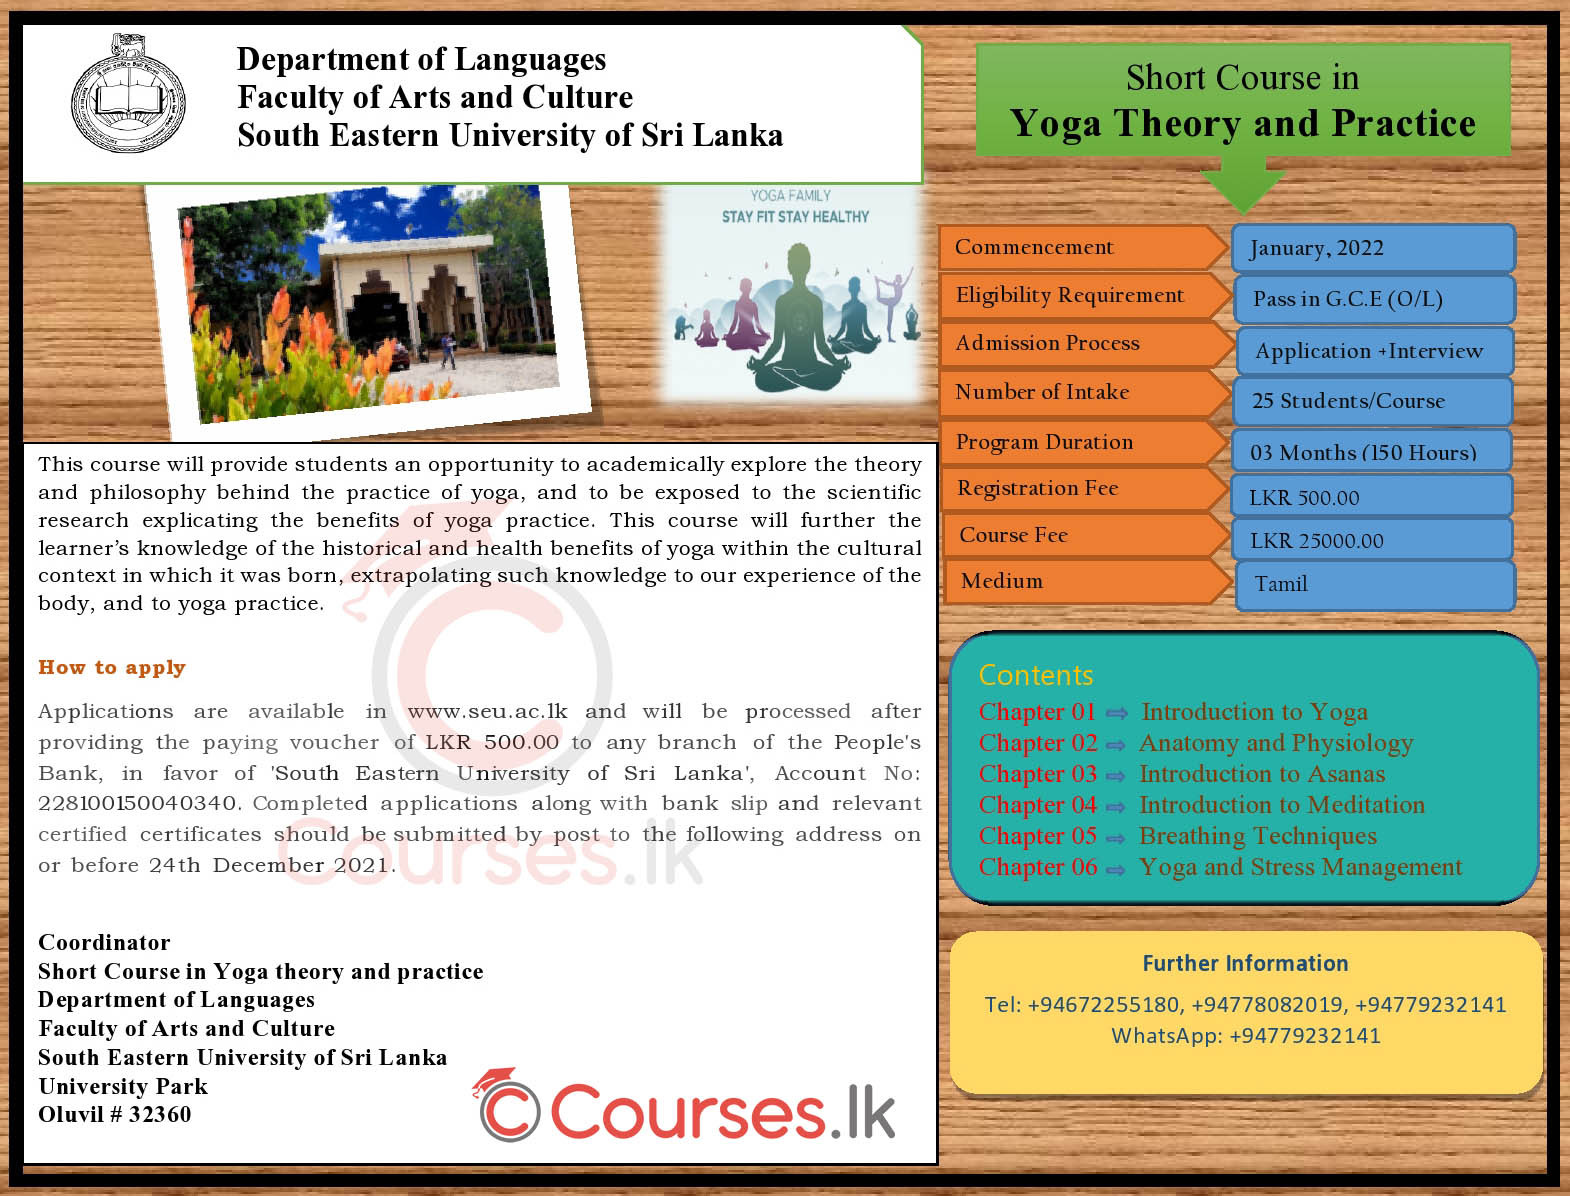 Short Course in Yoga Theory & Practice 2022 - South Eastern University of Sri Lanka